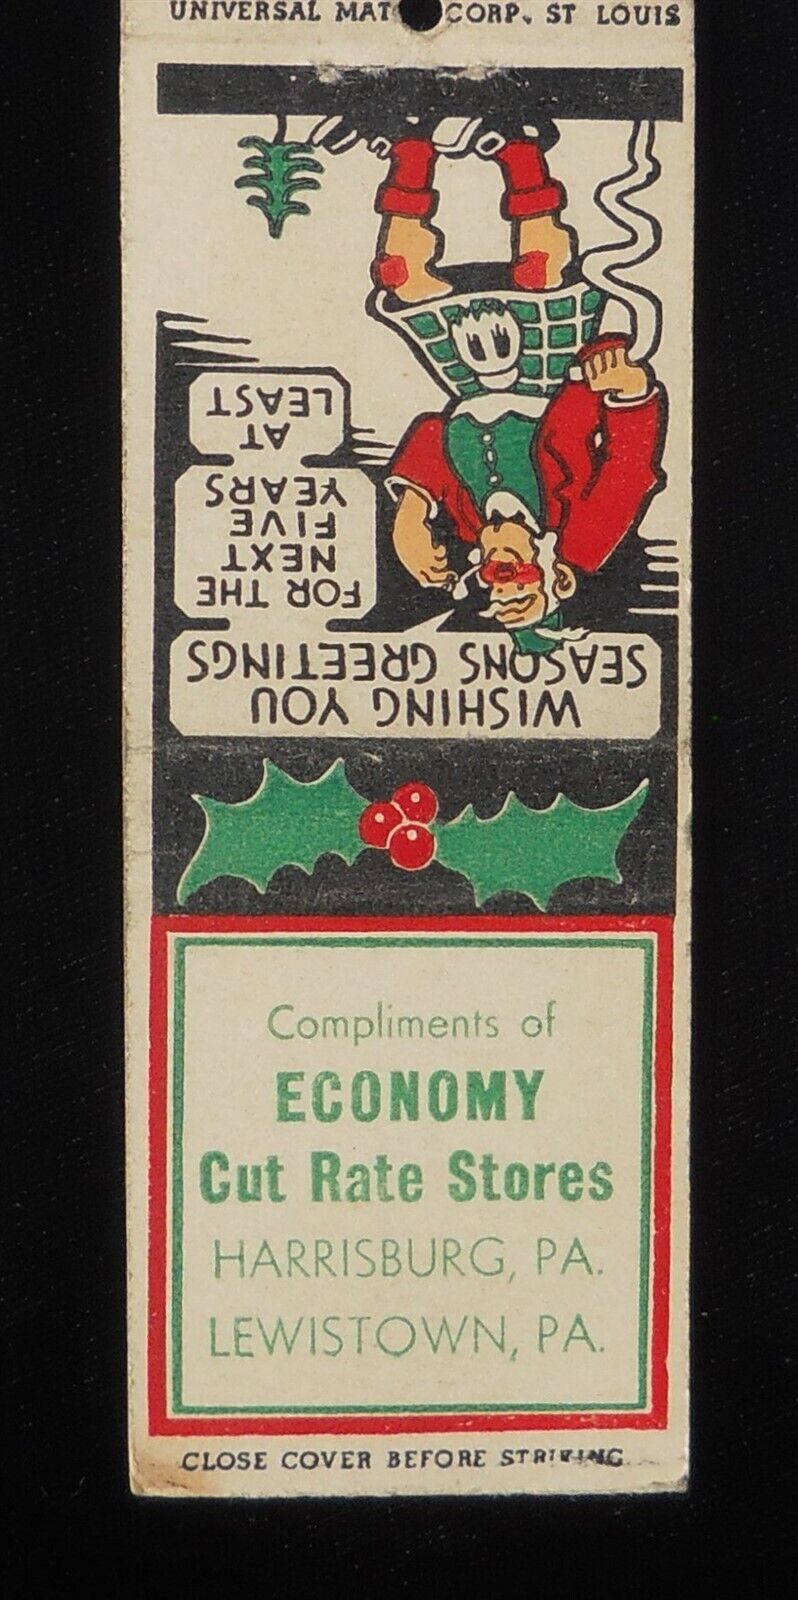 1930s Merry Christmas Economy Cut Rate Stores Harrisburg Lewistown PA Mifflin Co